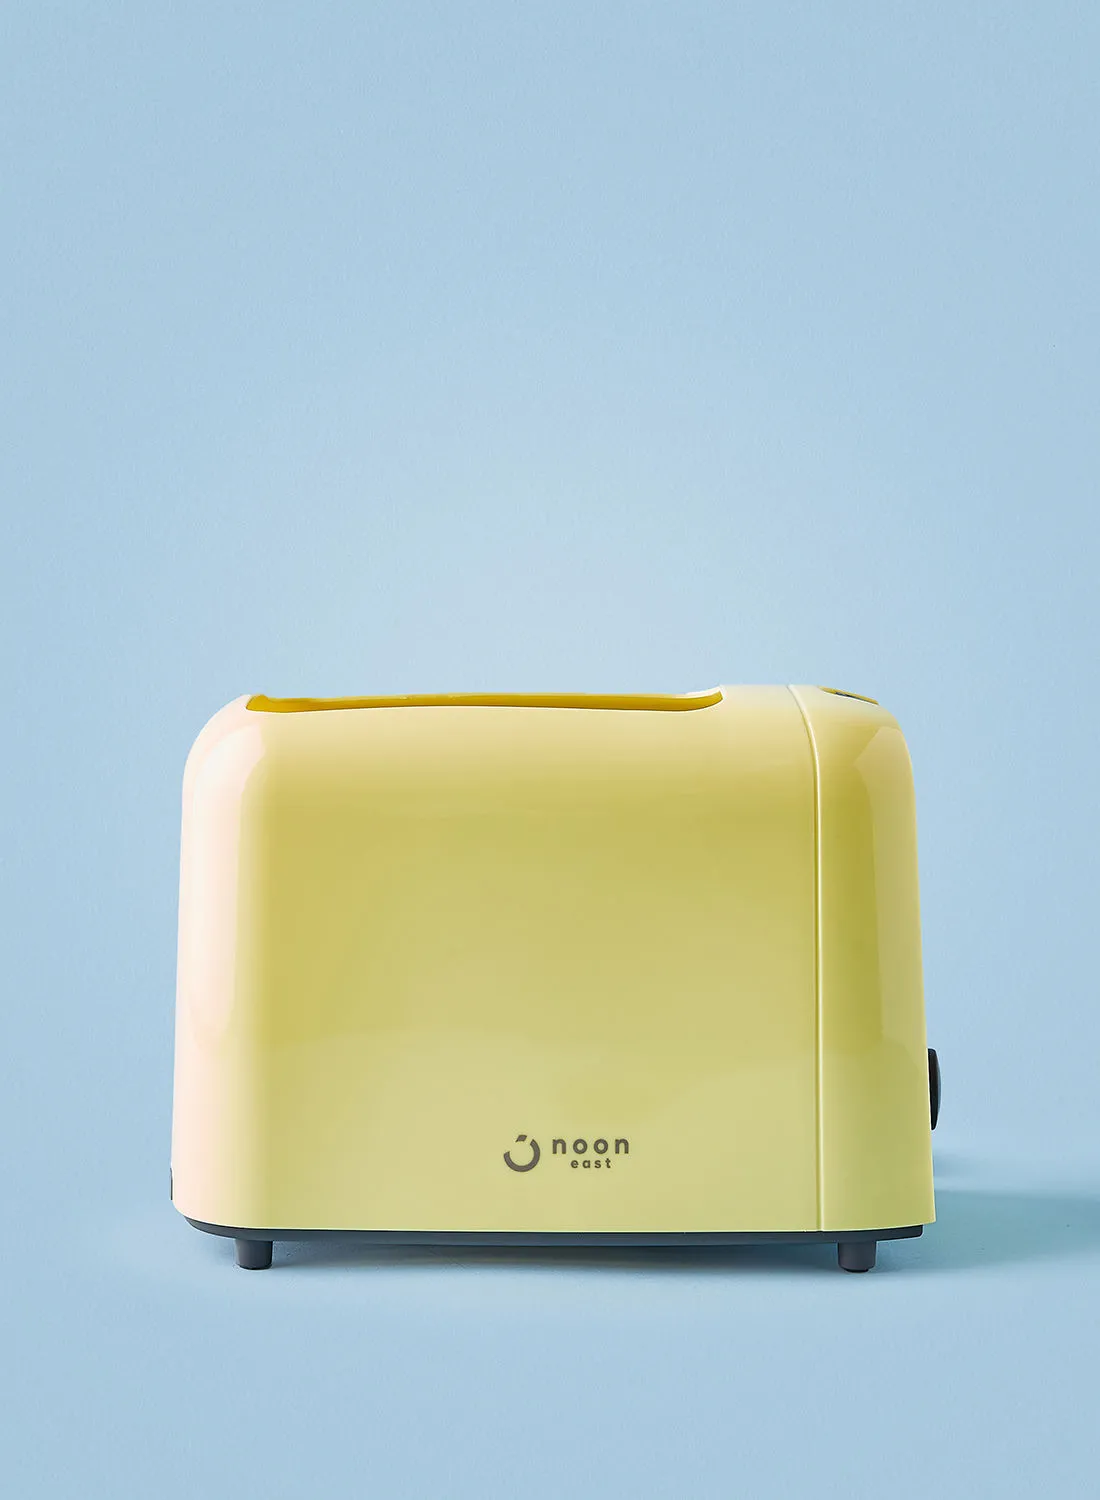 noon east Bread Toaster - For 2 Slice- 700 W With Defrost Function- Yellow